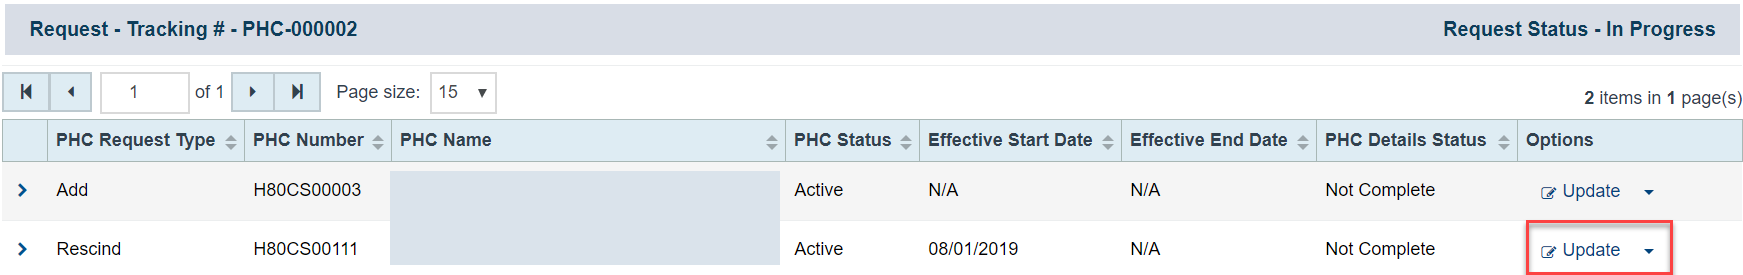 Screenshot of Request - Tracking Number page to see PHCs in process